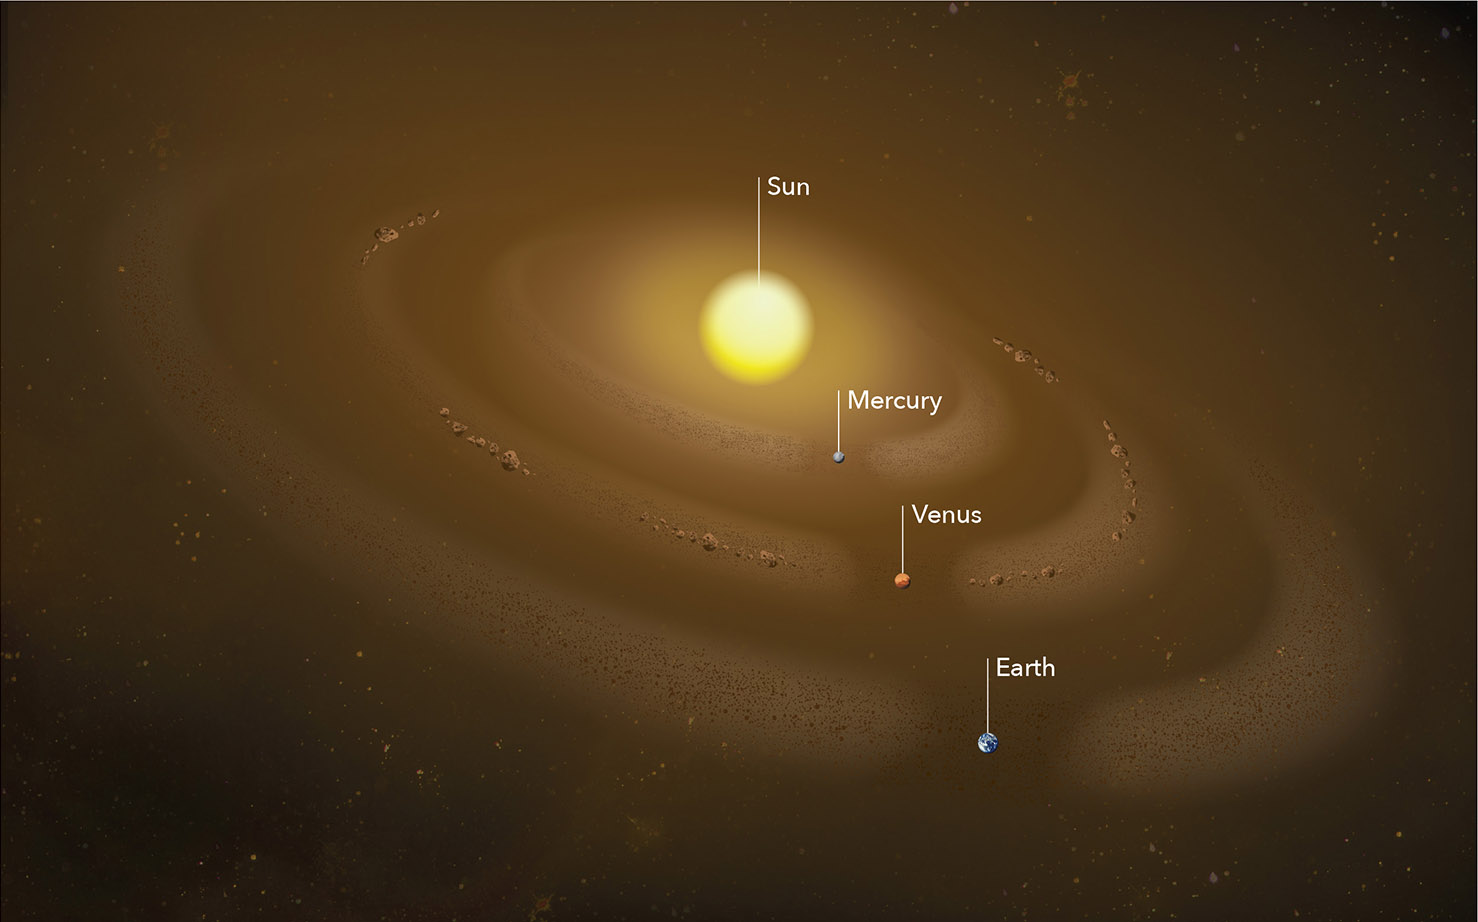 An illustration shows three rings of dust encircling the Sun, filing the orbits of Mercury, Venus, and Earth. Asteroids also appear in the dust ring filling Venus’ orbit.